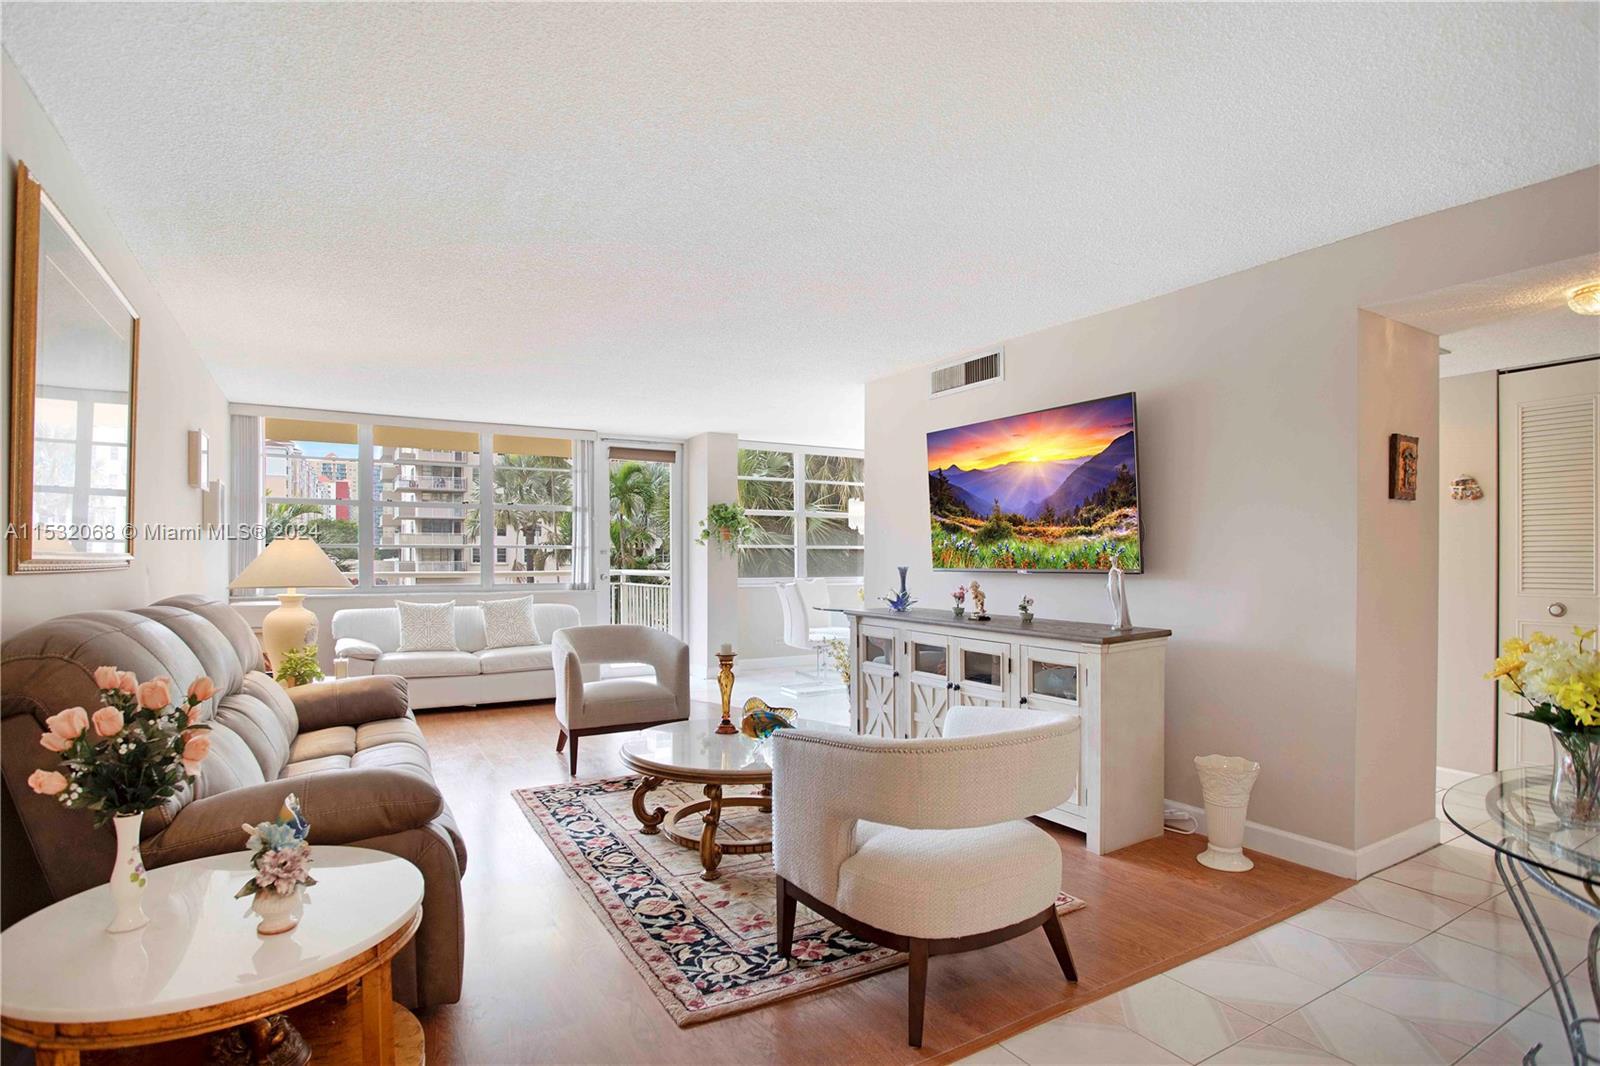 Bright and spacious 1/1.5 residence in a highly desirable location of the world-renowned Sunny Isles